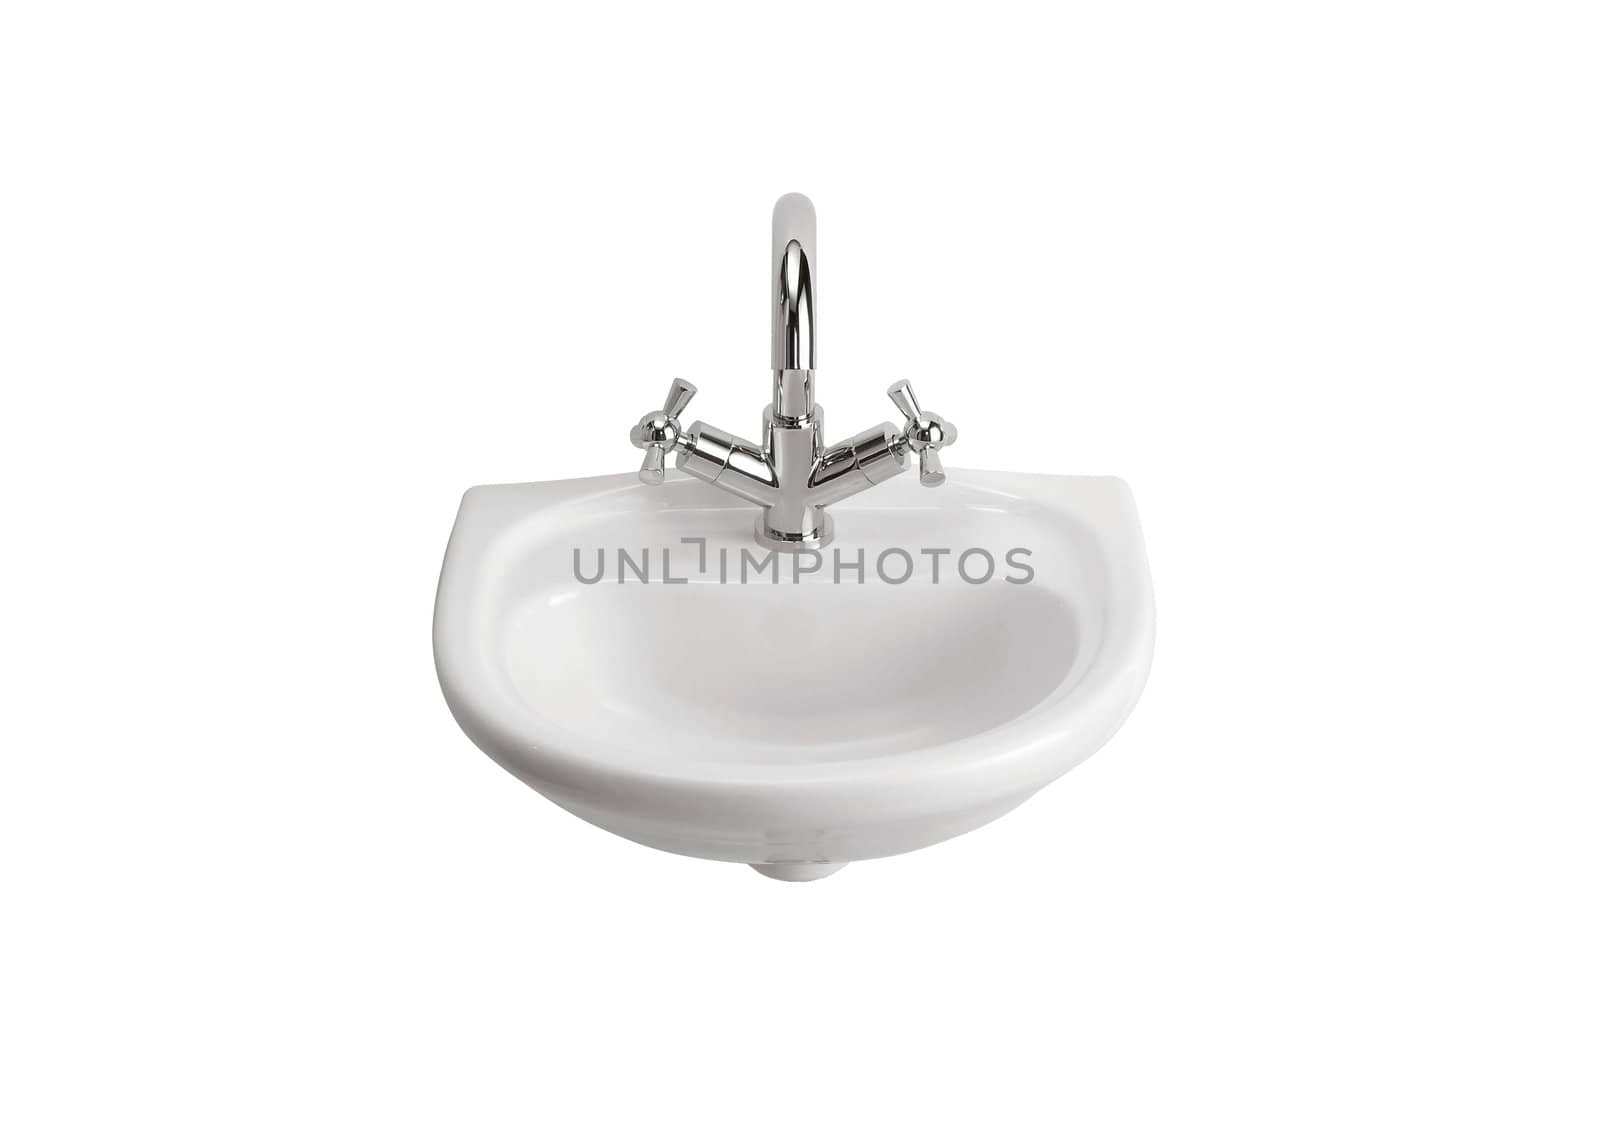 Fittings sink isolated on a white background